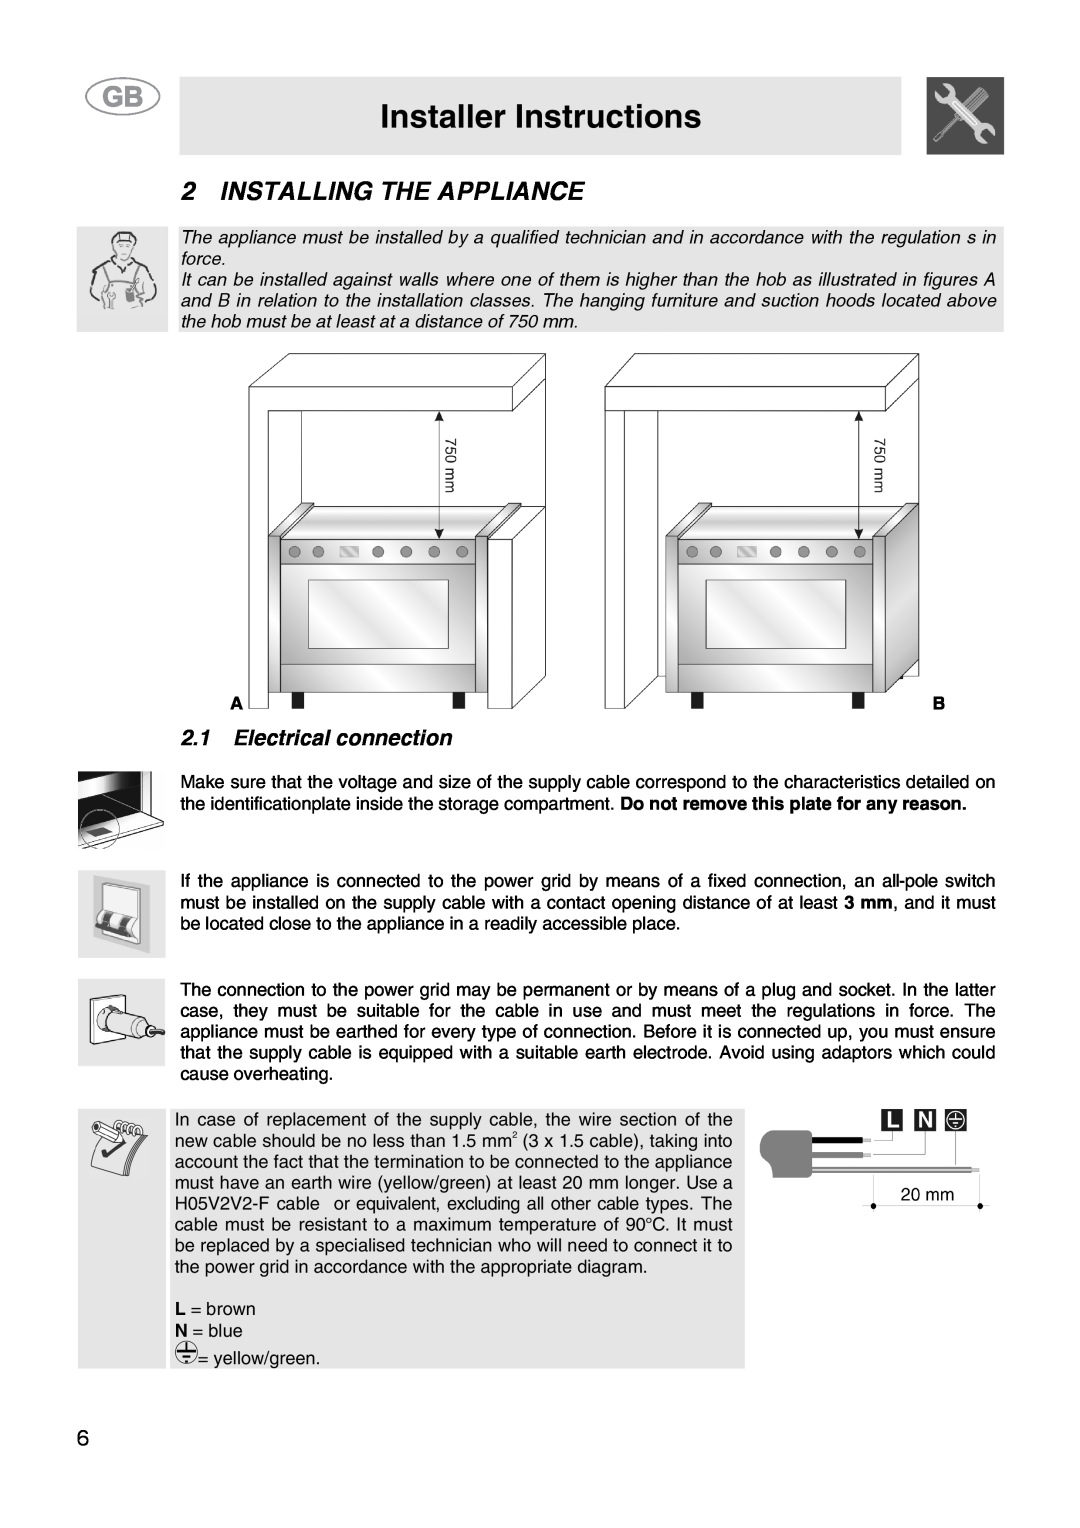 Smeg CS15-5 manual Installer Instructions, Installing The Appliance, 2.1Electrical connection 